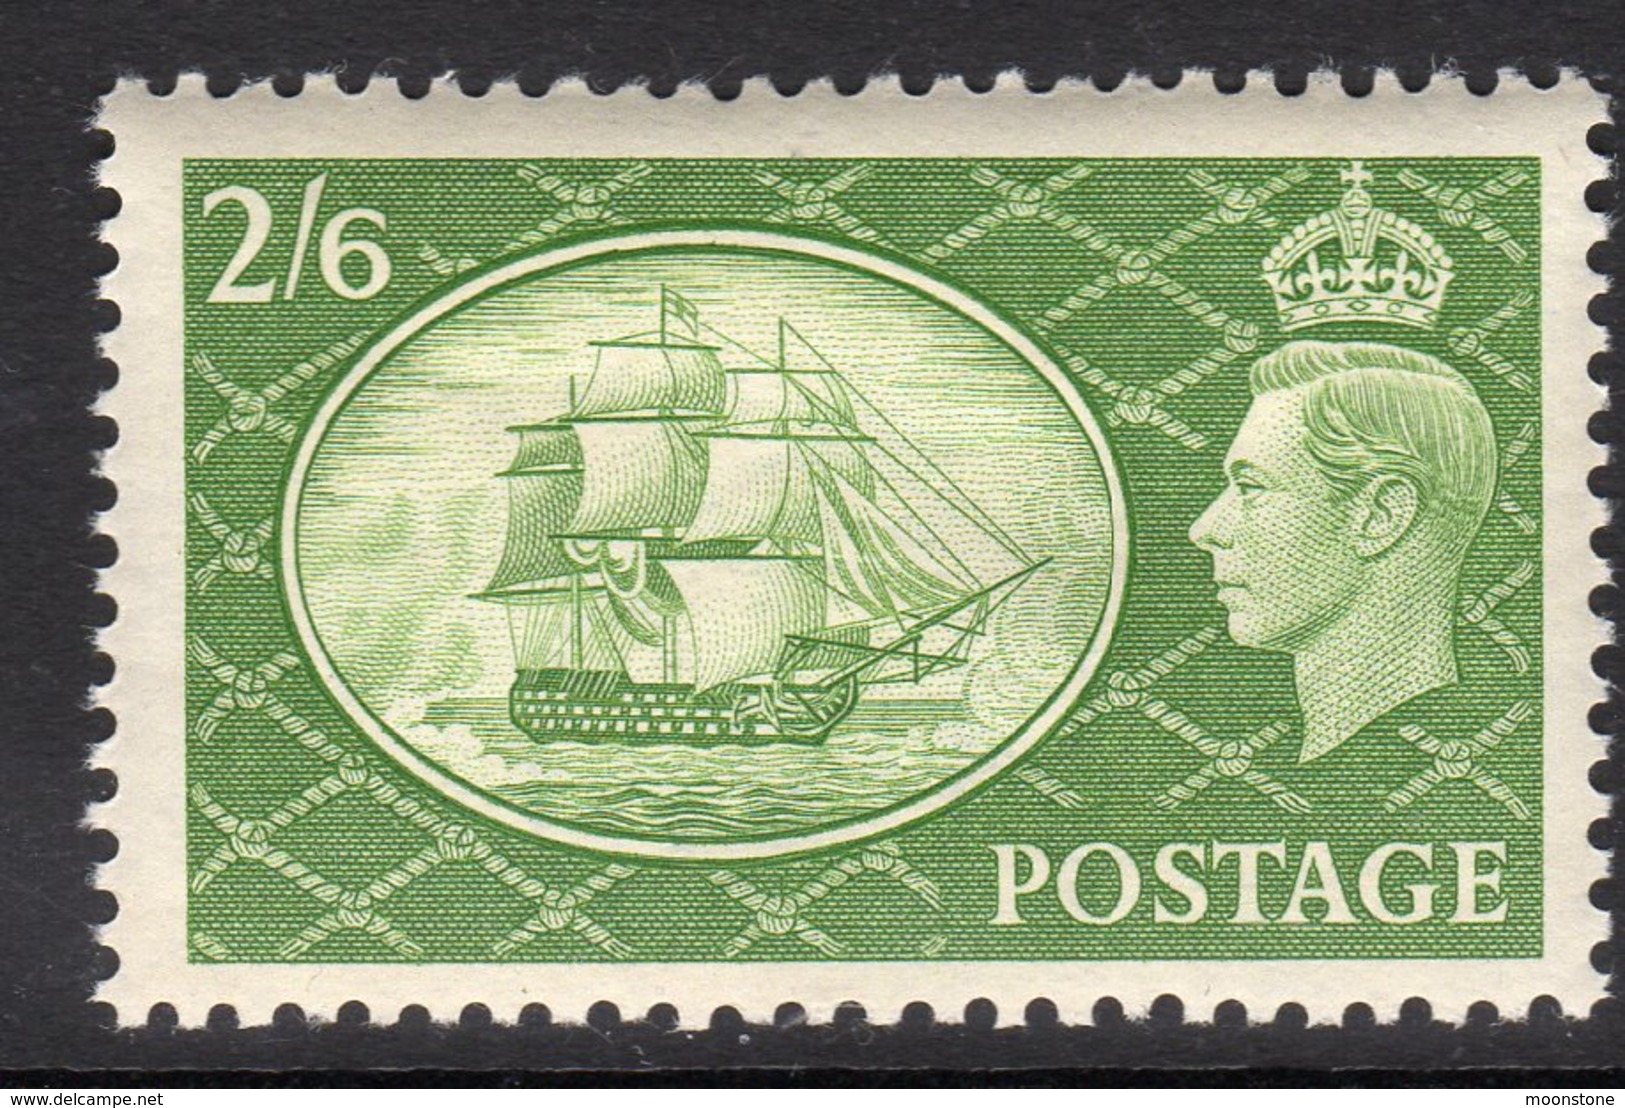 Great Britain GB George VI 1951 'Festival' 2/6d Definitive, Hinged Mint, SG 509 - Unused Stamps